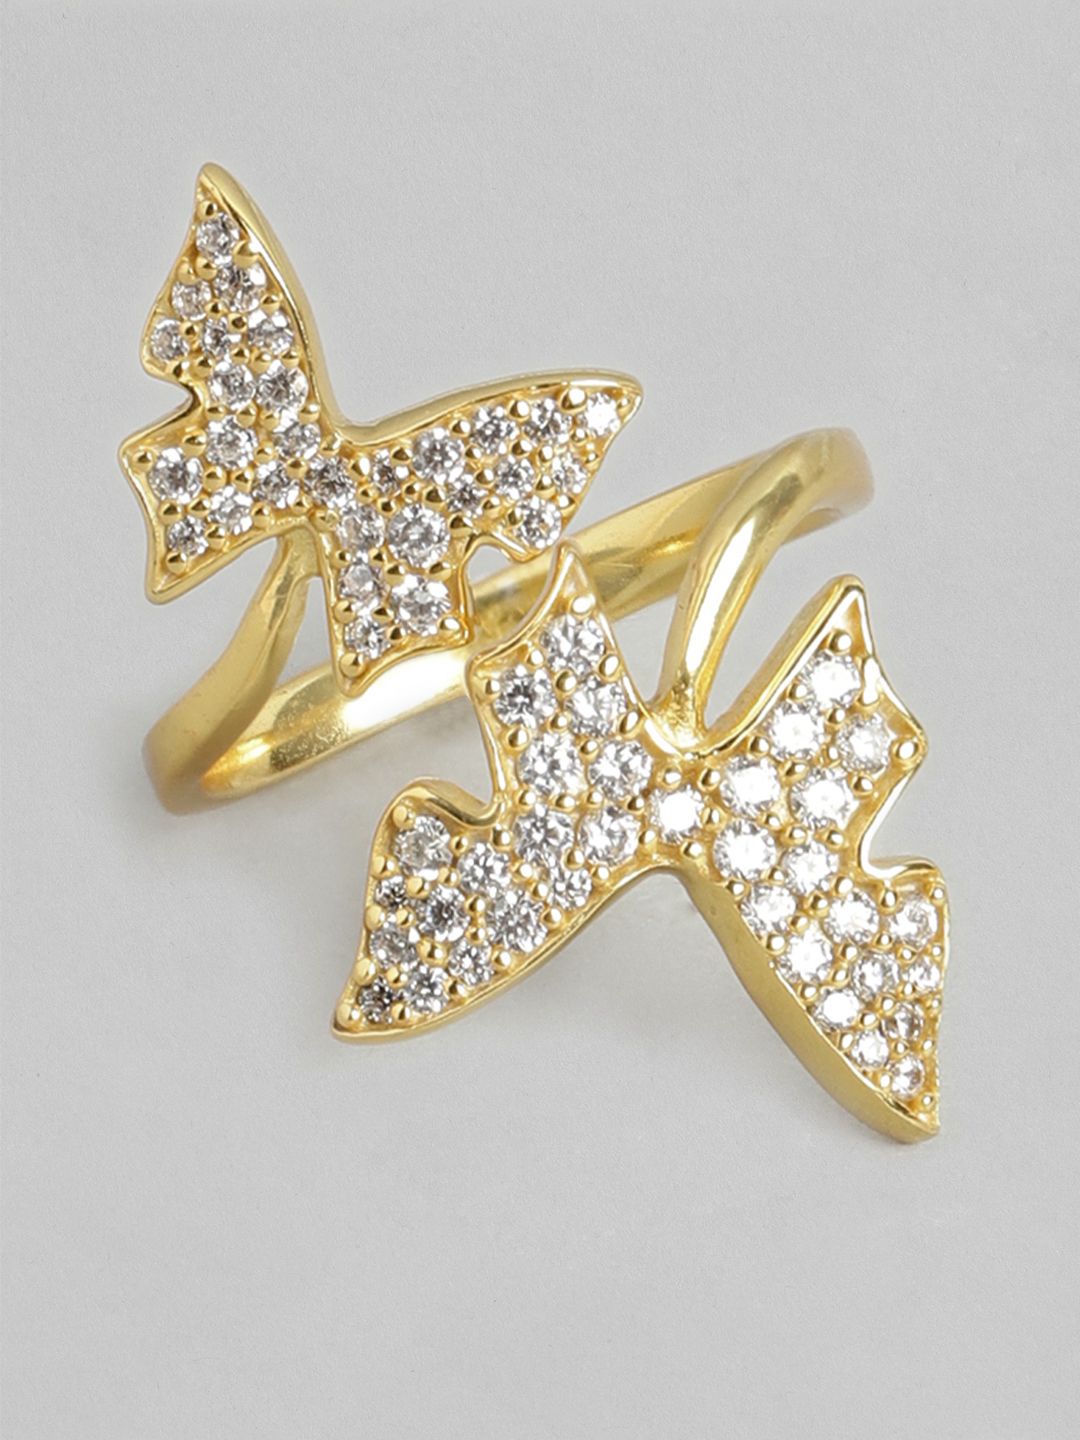 Carlton London Gold-Plated Cubic Zirconia Studded Handcrafted Finger Ring Price in India